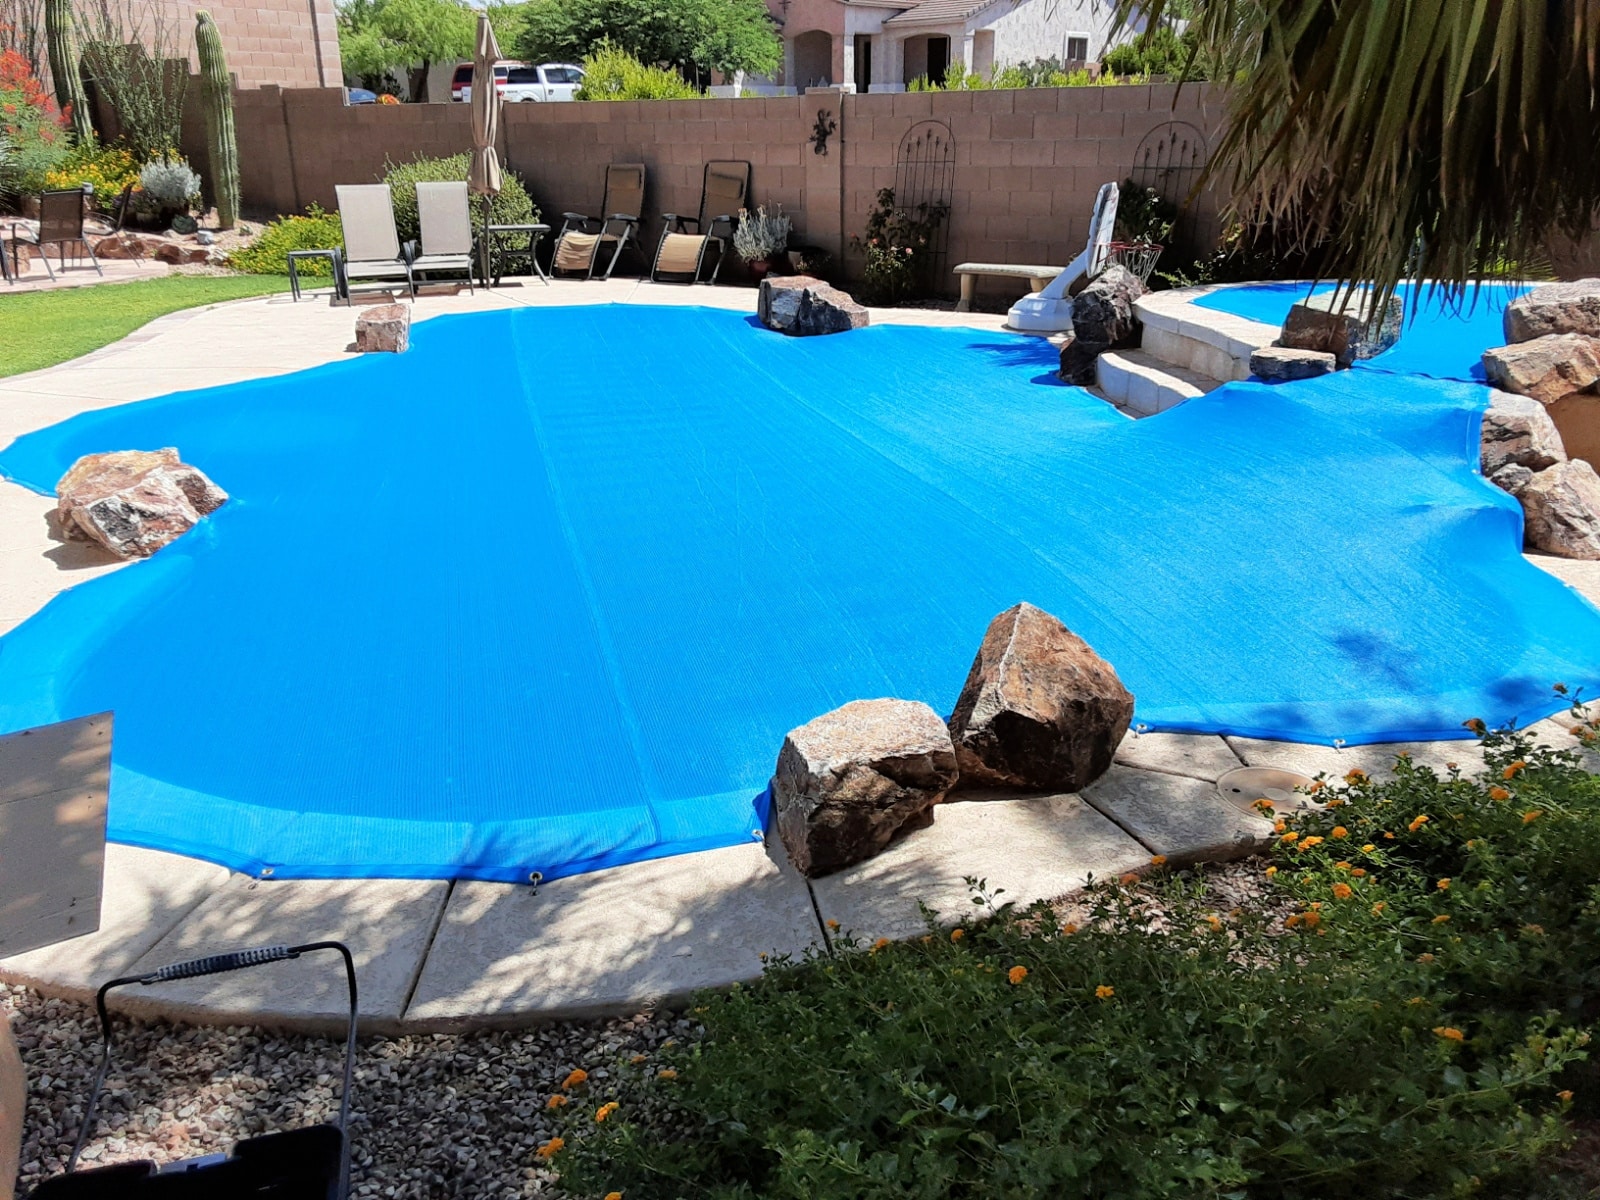 You are currently viewing Mesh vs. Vinyl Pool Covers: Why We Think Mesh Takes the Win